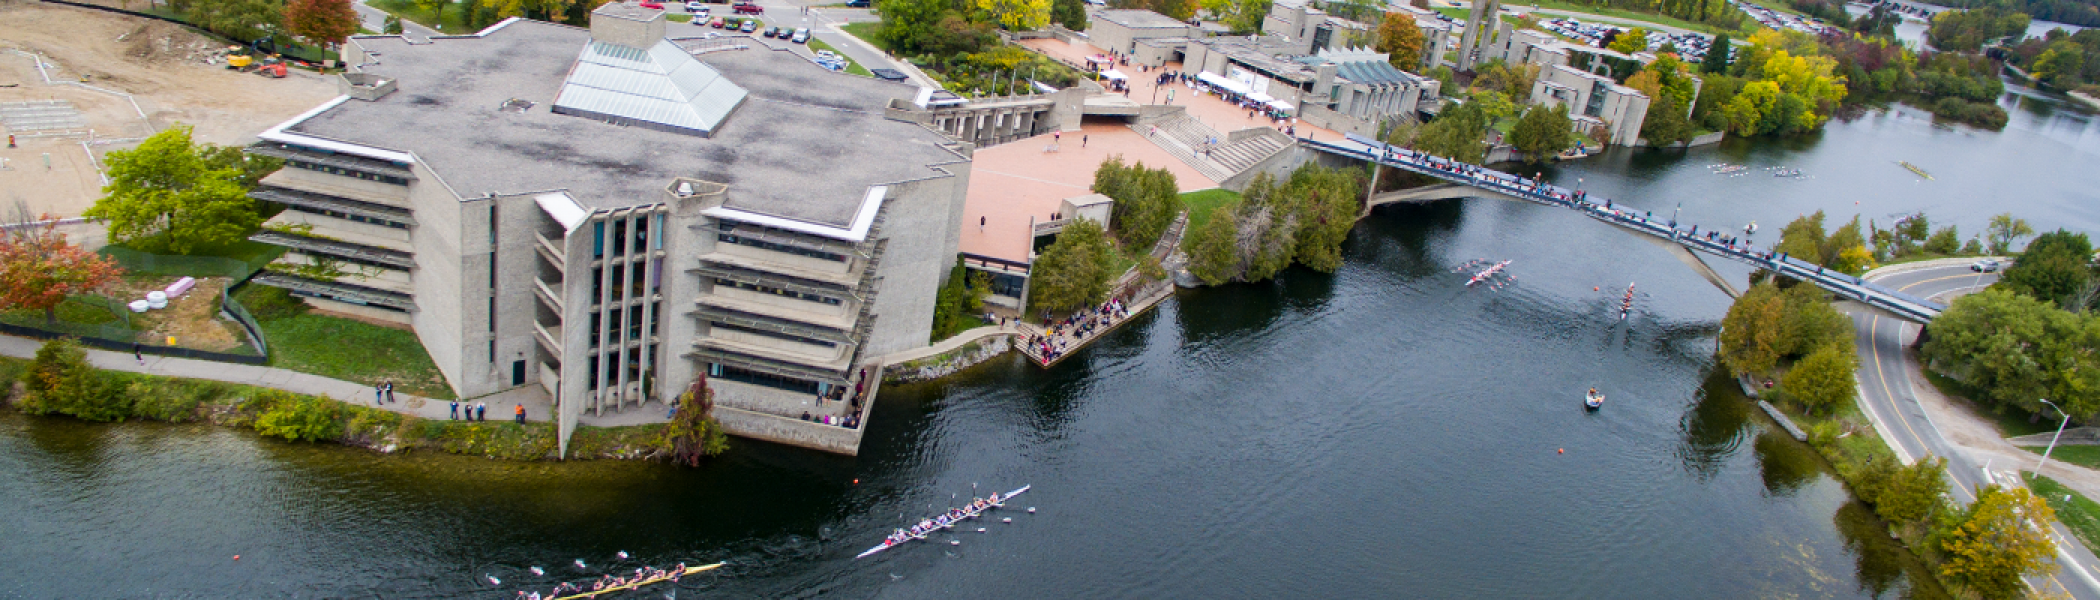 Aerial view of the Bata library, Faryon bridge and the Otonabee river in the fall, with boats rowing down it